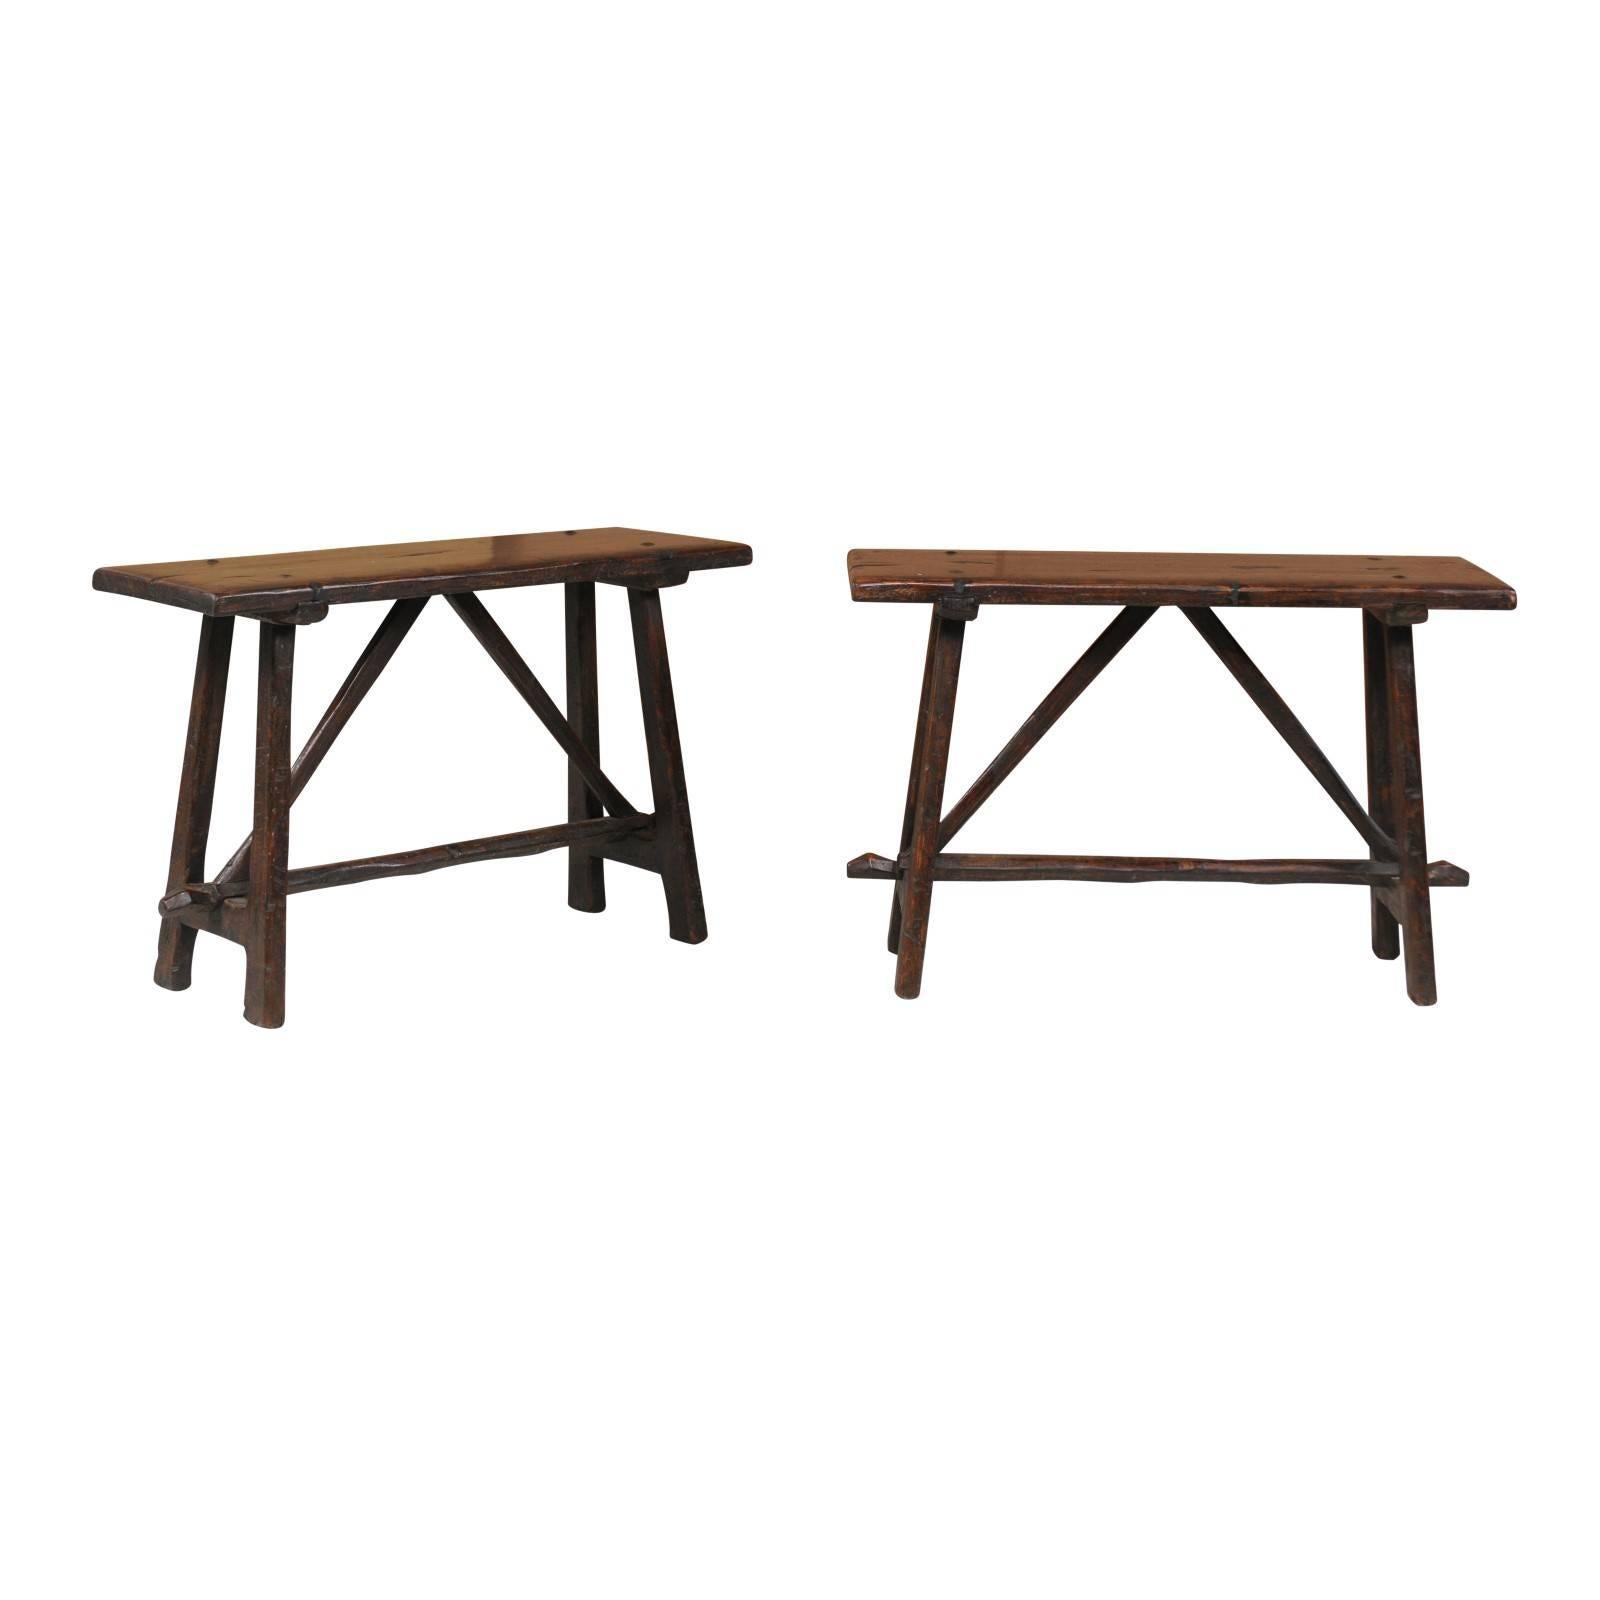 Pair of Italian 1820s Walnut Console Tables with Trestle Base and Splayed Legs